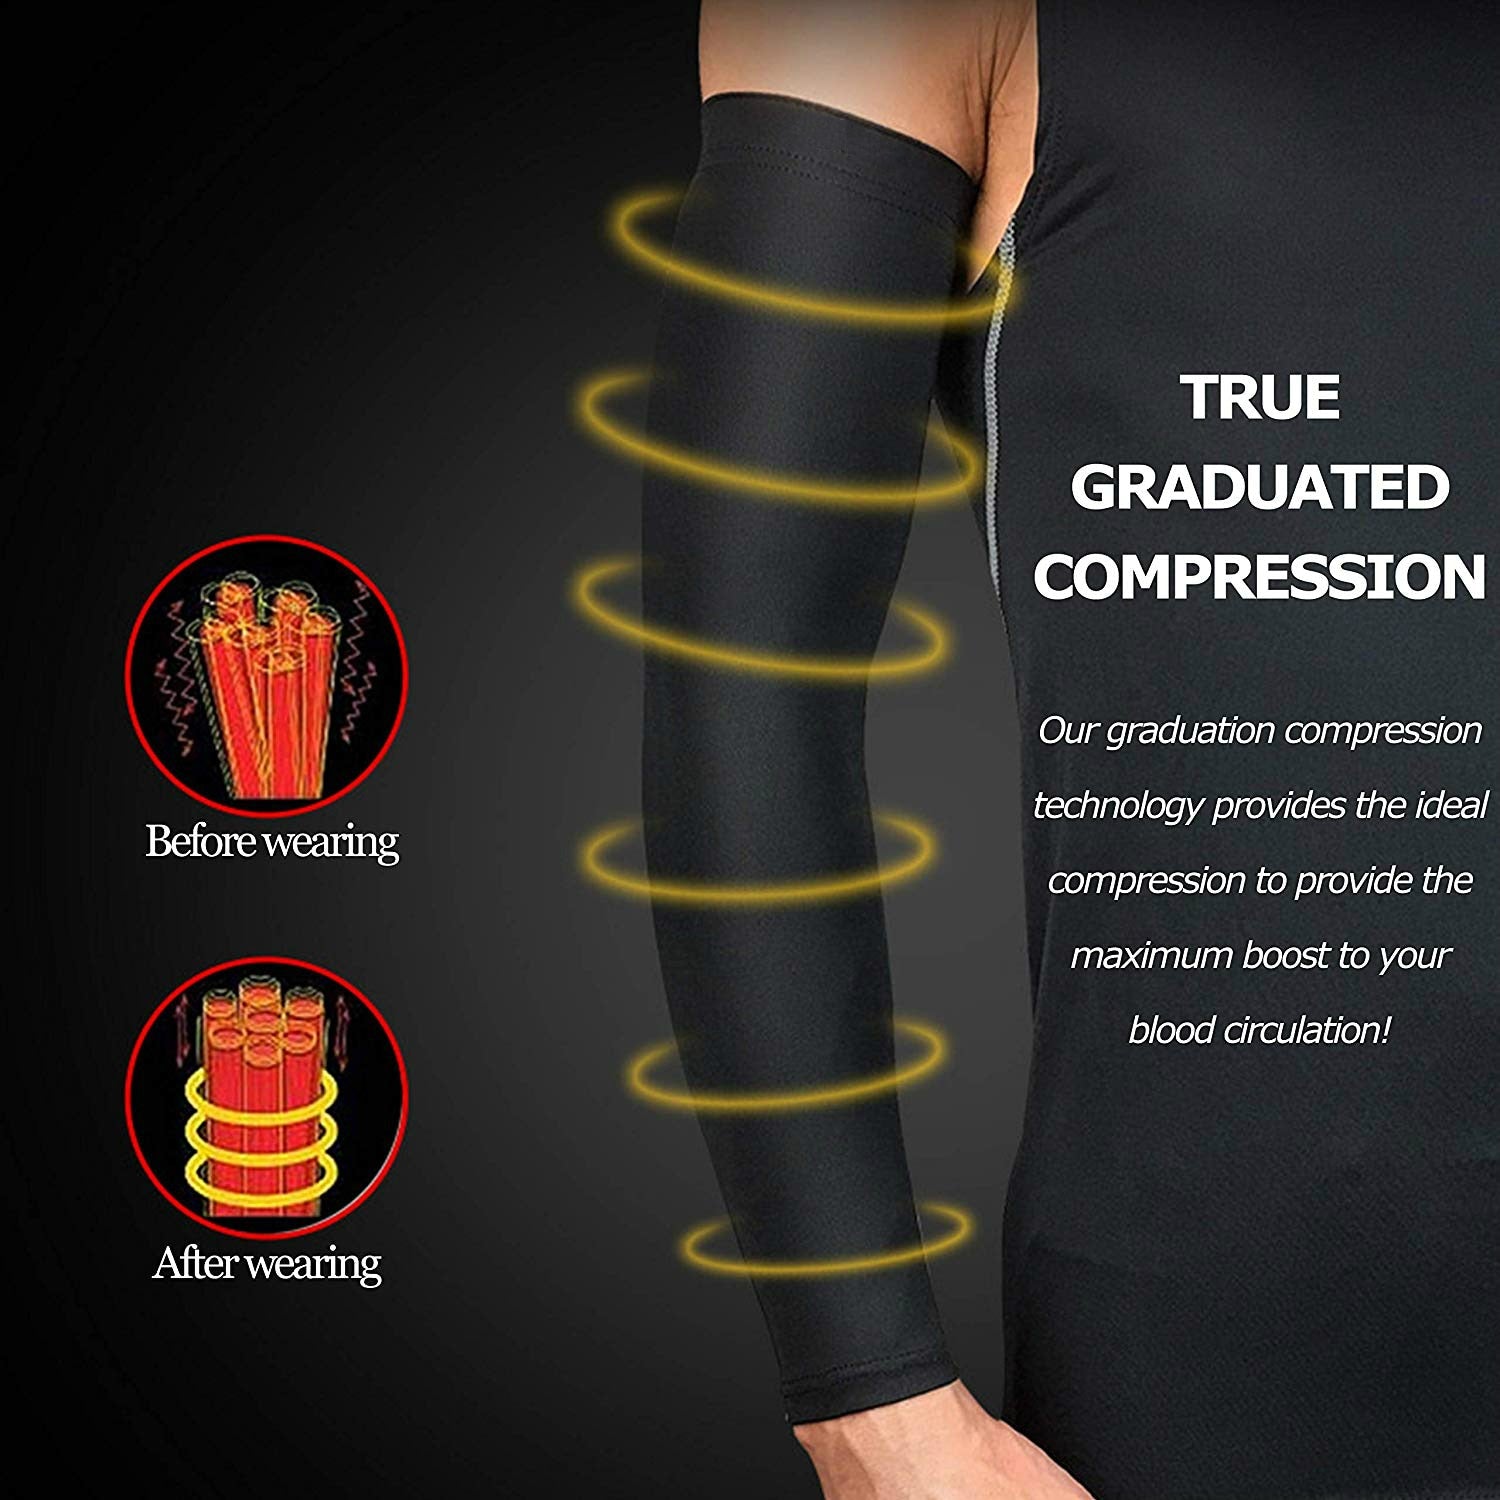 WorthWhile Sports Arm Compression Sleeve Basketball Cycling Arm Warmer Summer Running UV Protection Volleyball Sunscreen Bands